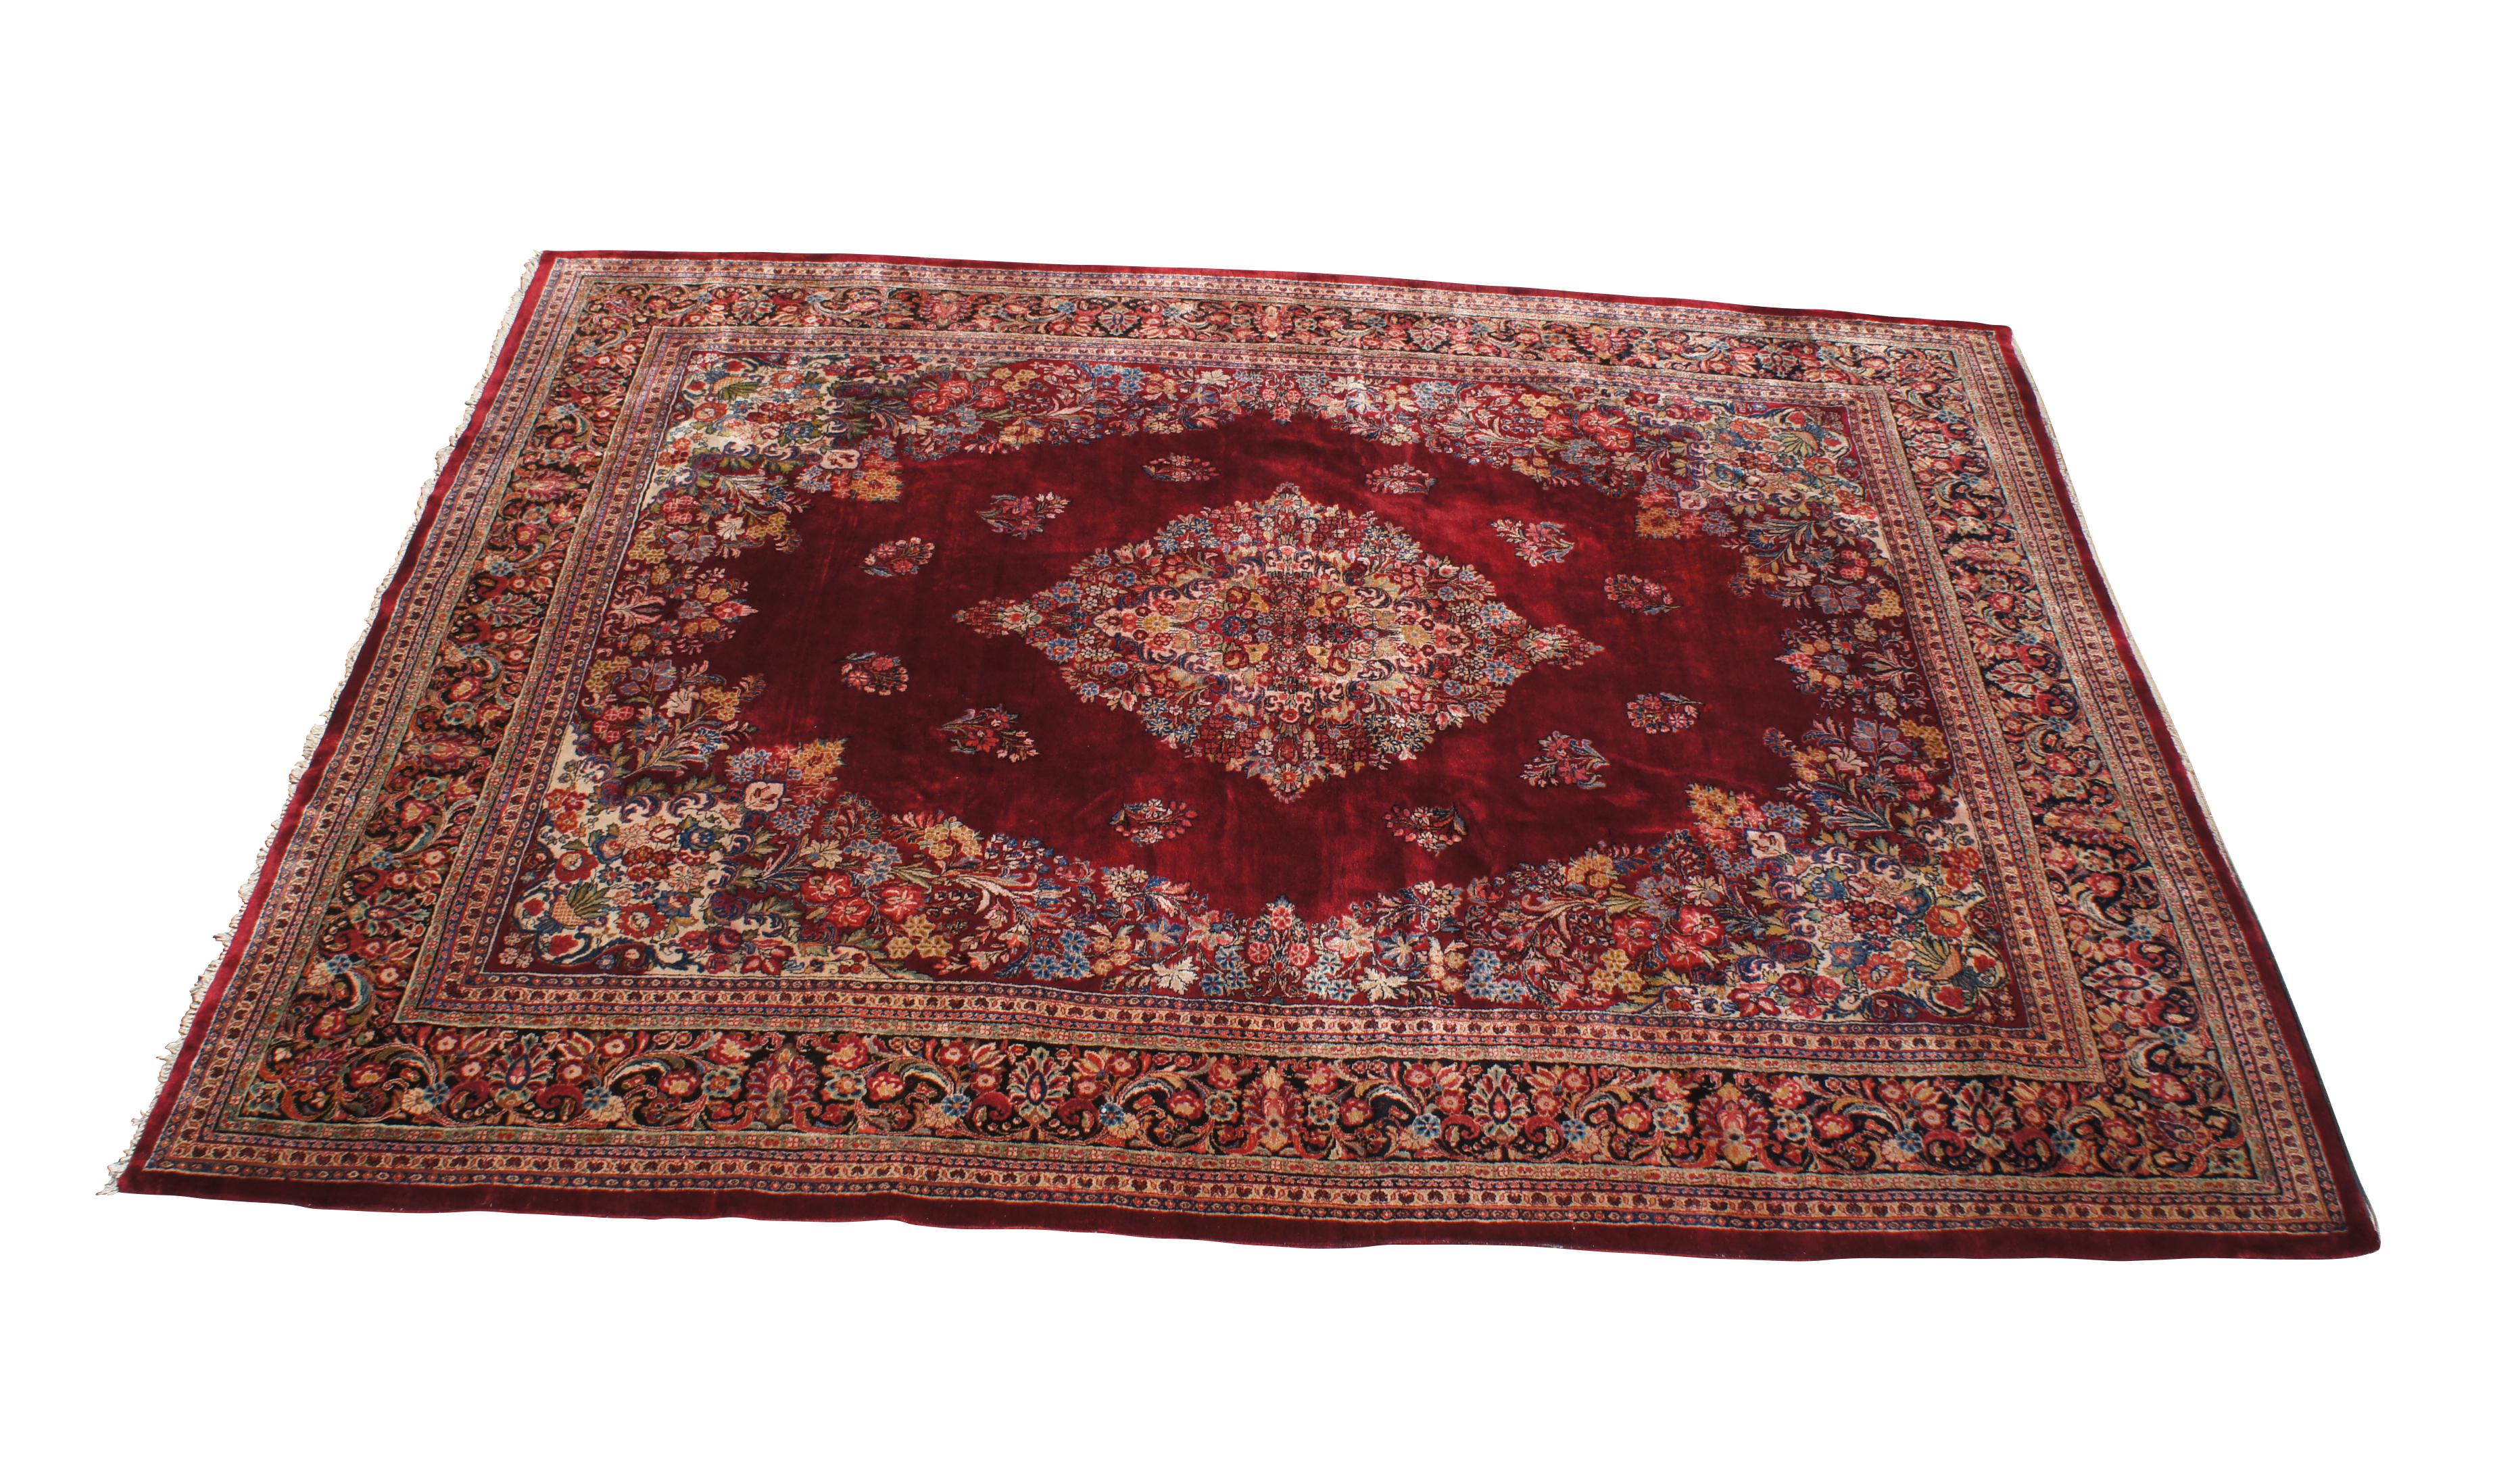 Vintage Indo-Tabriz Hand Knotted Floral Medallion Wool Area Rug Carpet 10' x 14' In Good Condition For Sale In Dayton, OH